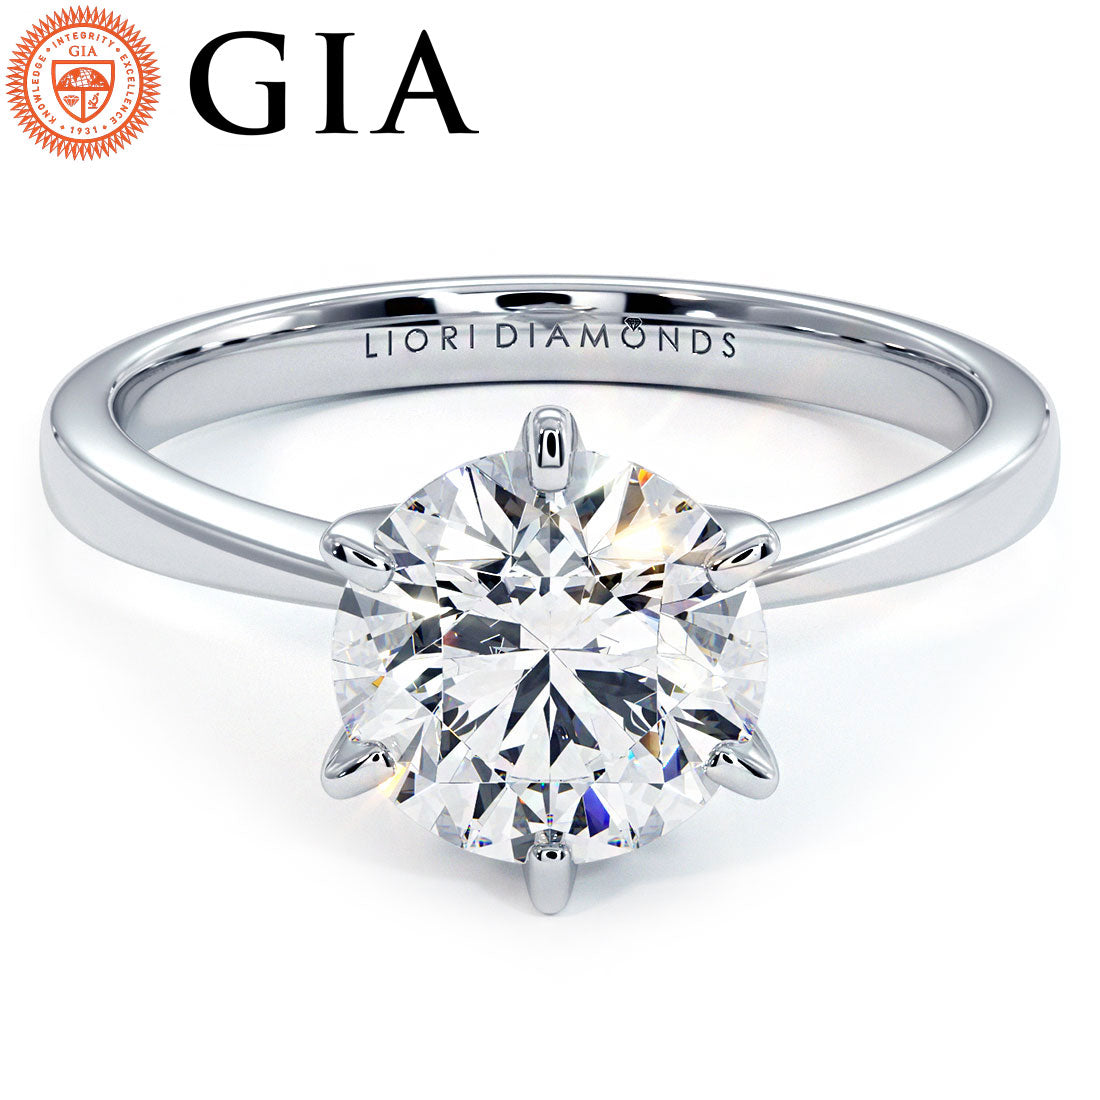 1.51ct GIA Certified Round Brilliant Petite Tapered 6 Prong 